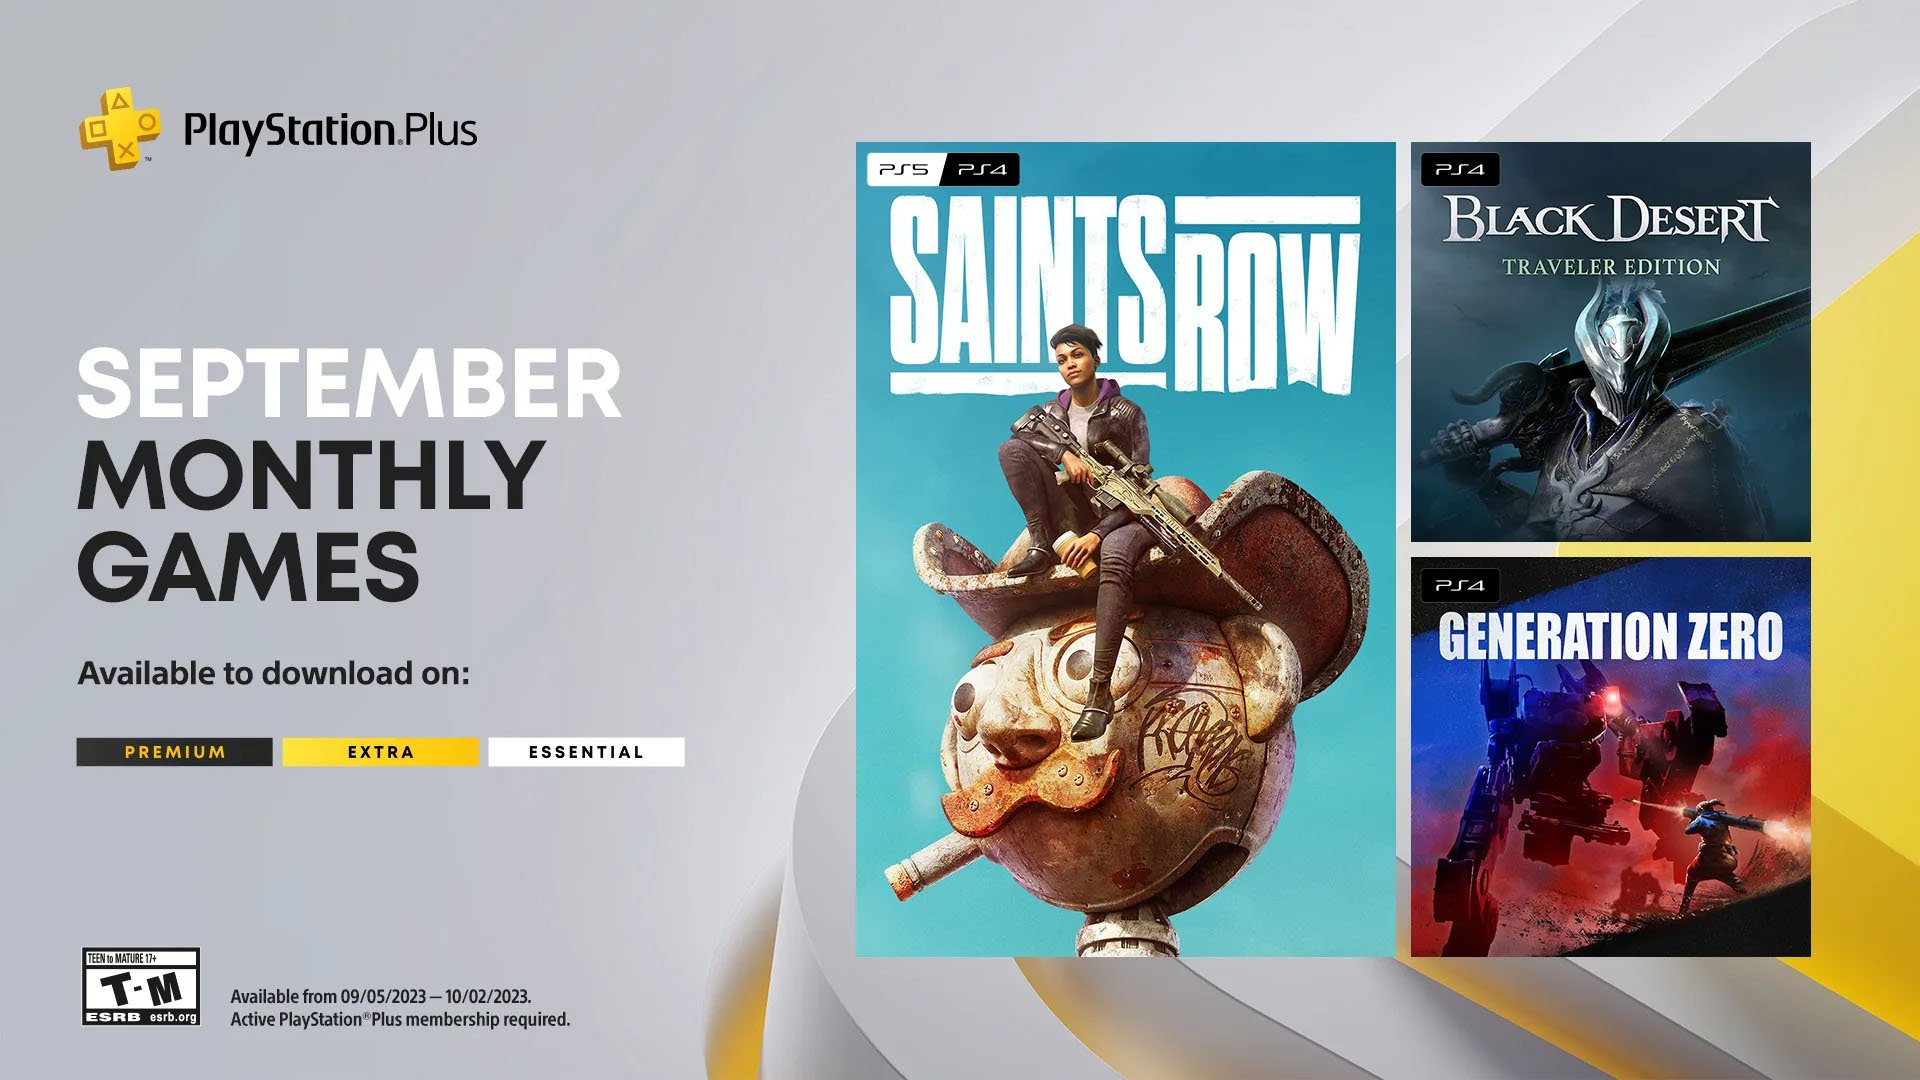 PlayStation Plus Monthly Games lineup for September 2023 announced